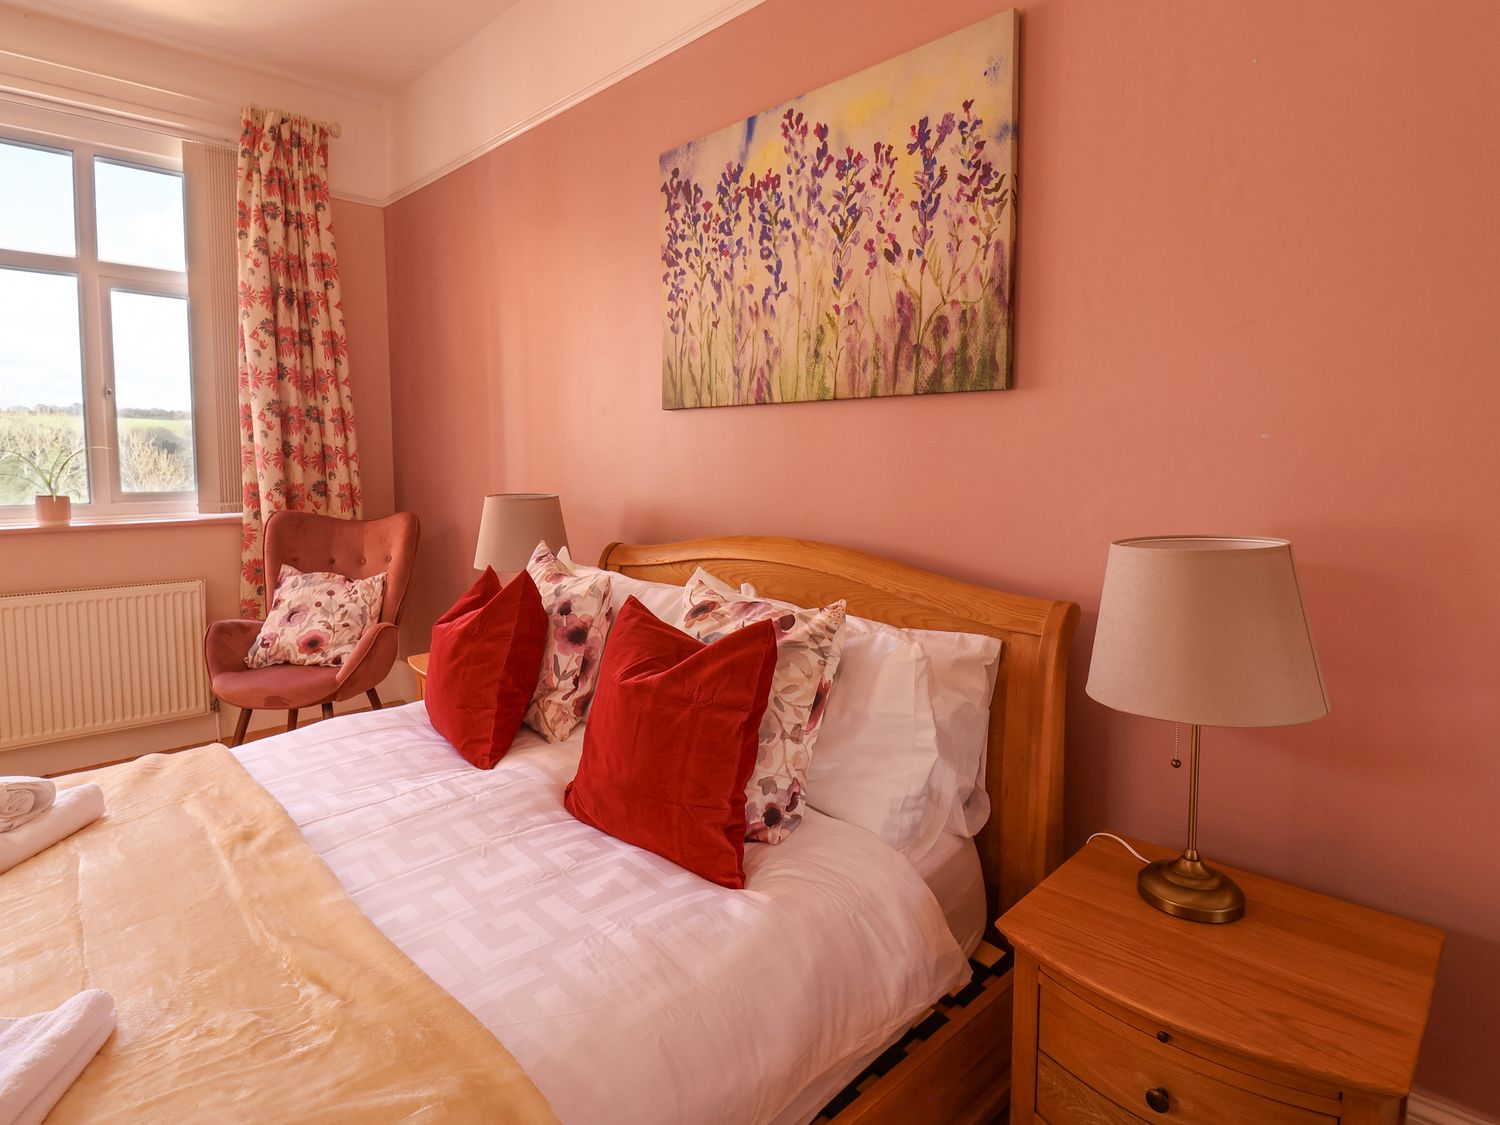 Red House, near Lyme Regis, Devon/Dorset border. Large family home set in spacious grounds. Two pets